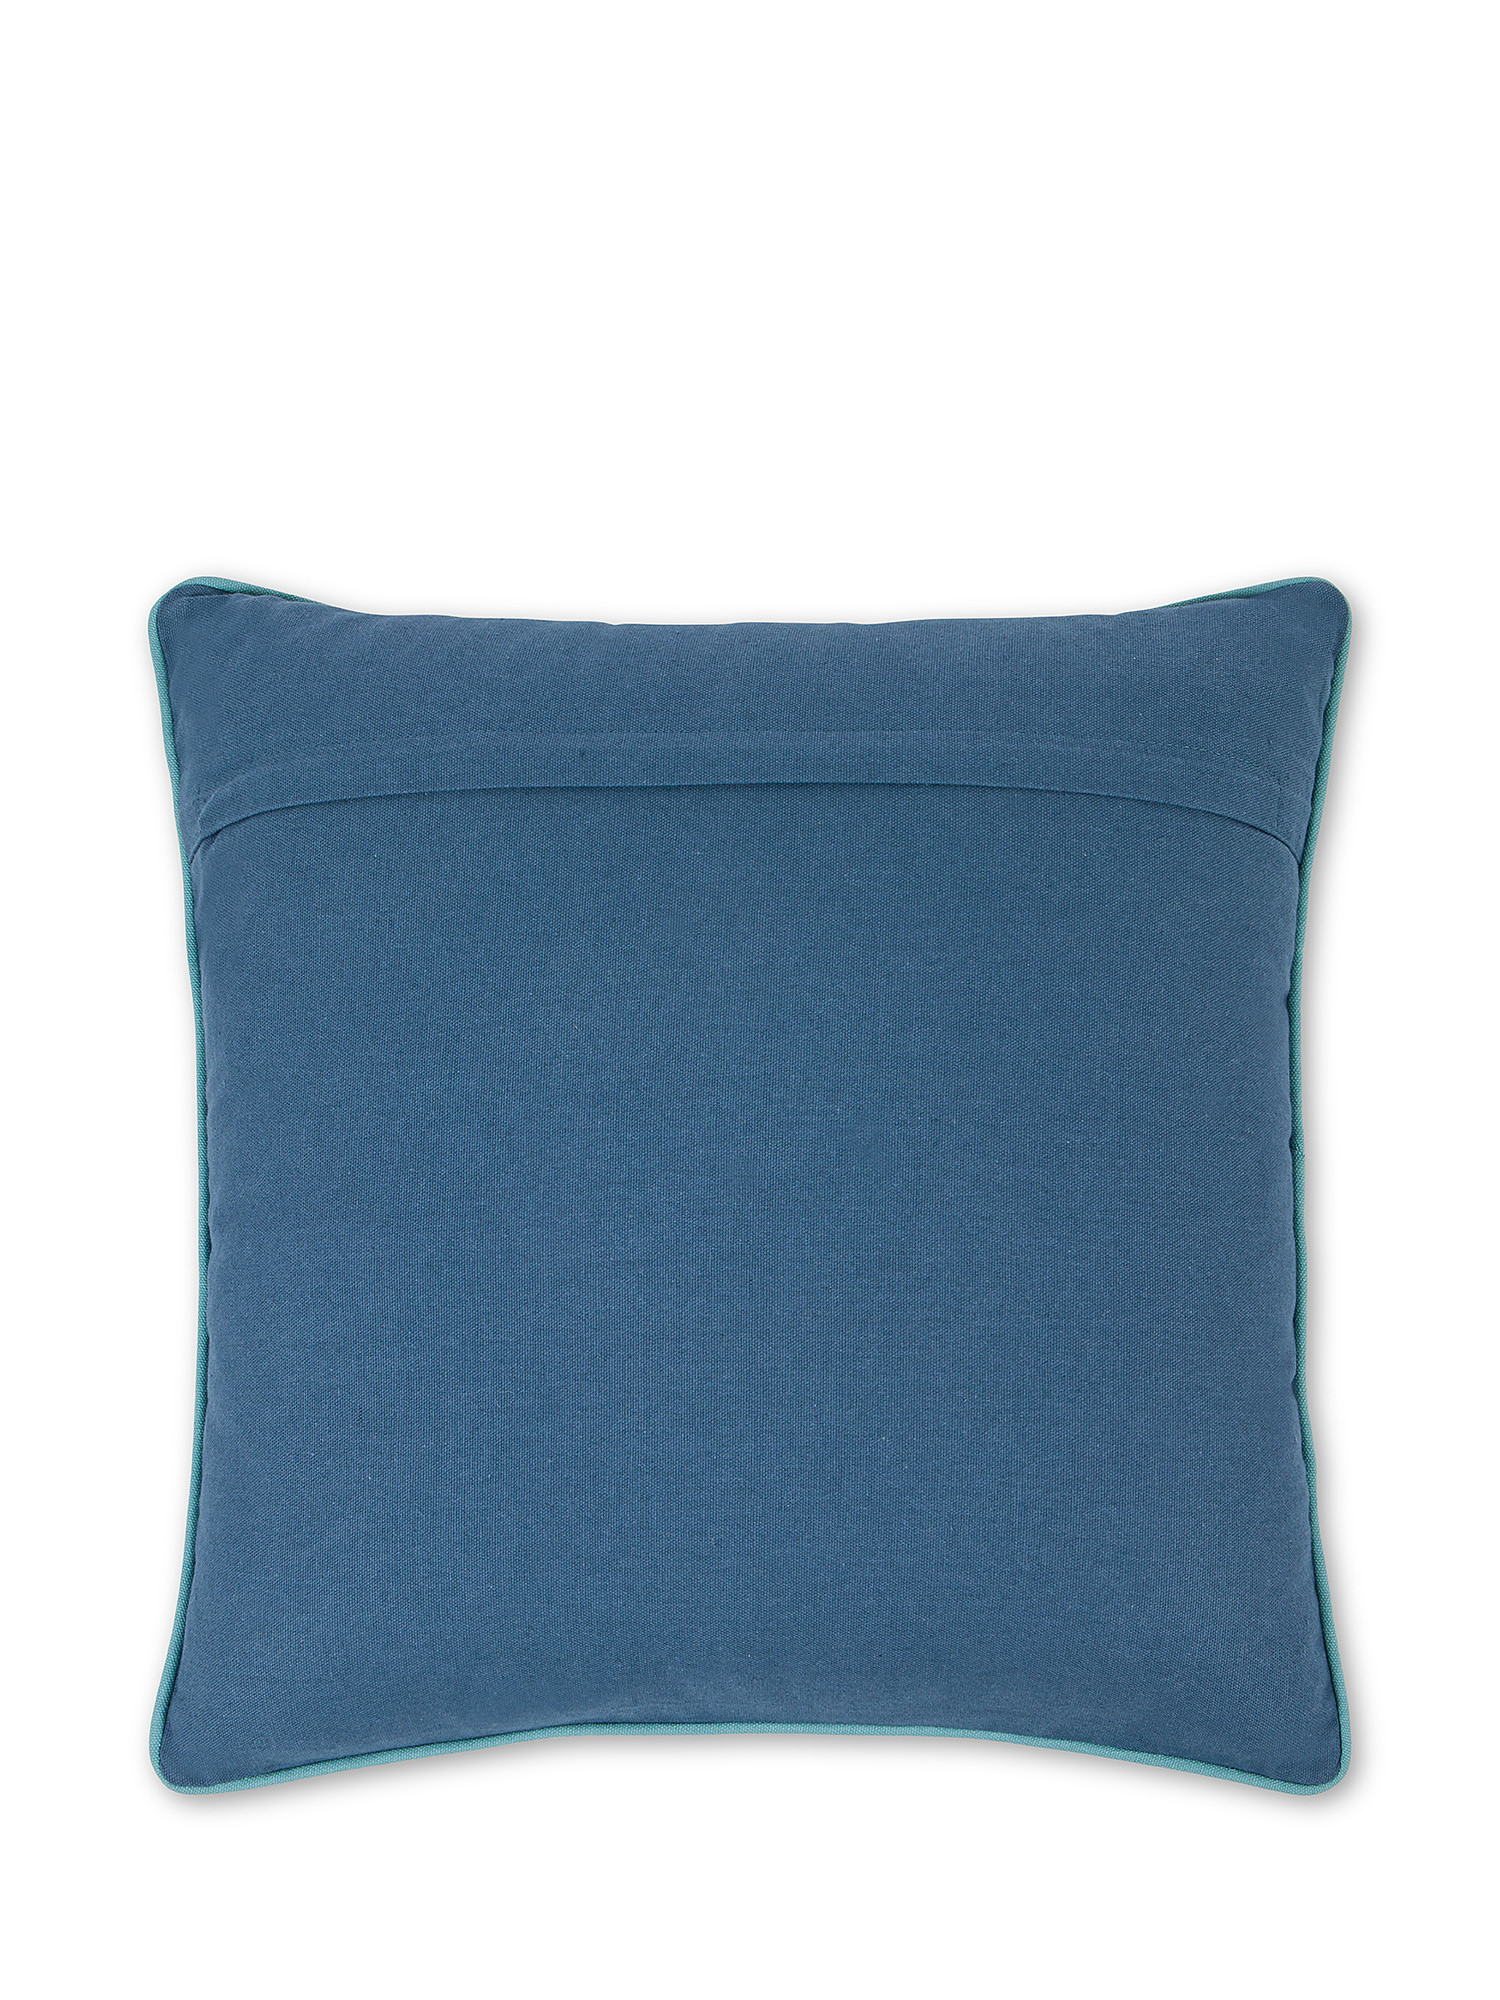 45x45 cm cushion with applications and embroidery, Blue, large image number 1